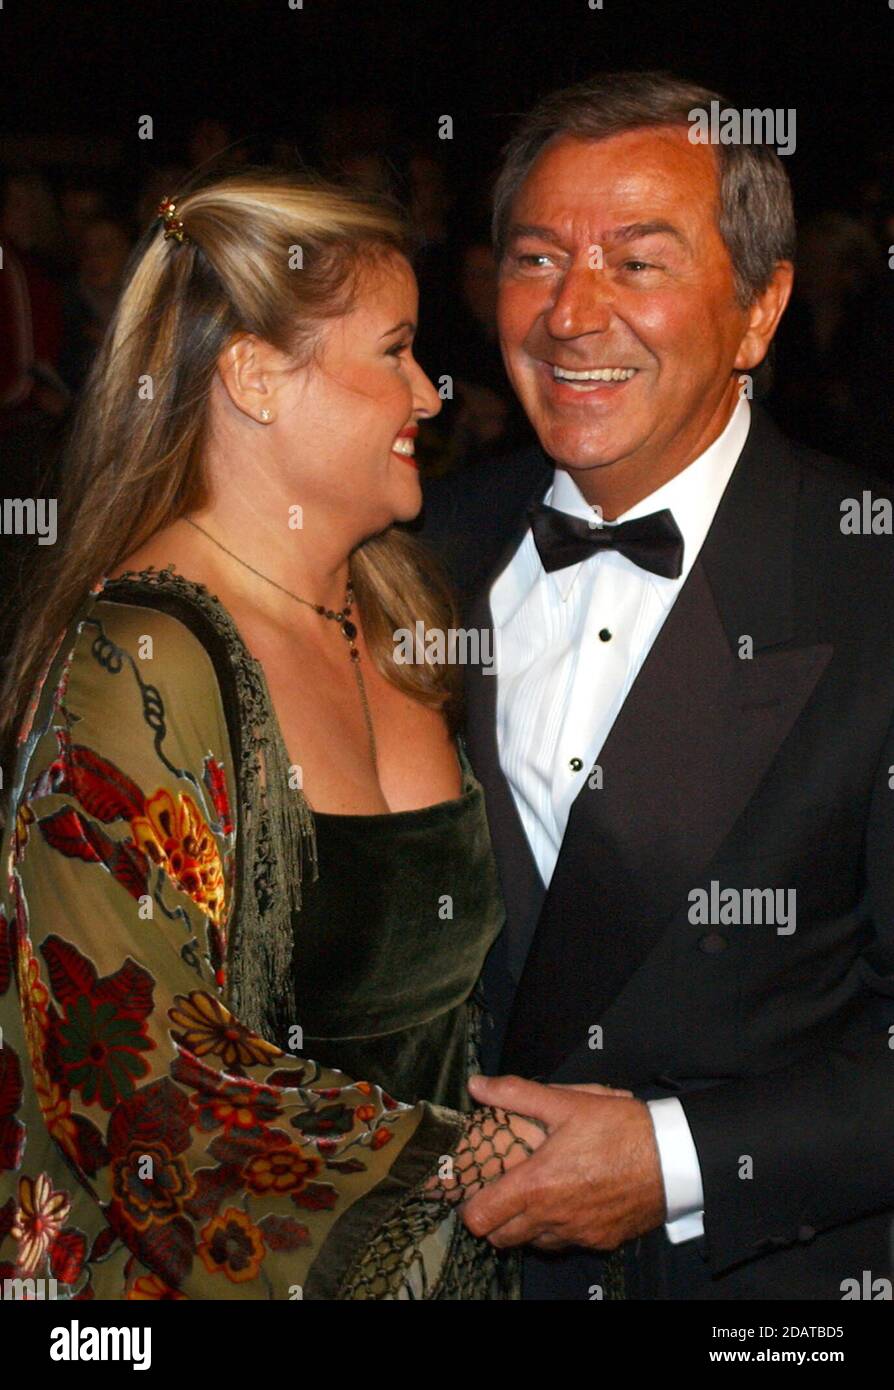 File photo dated 15/10/2002 of Des O'Connor, and wife, singer Jodie Wilson. Des O'Connor, 88, who sadly passed away on Saturday 14 November. His agent confirmed he had been admitted to hospital just over a week ago, following a fall at his home in Buckinghamshire. Unfortunately yesterday evening his condition suddenly deteriorated and he drifted peacefully away in his sleep. Stock Photo